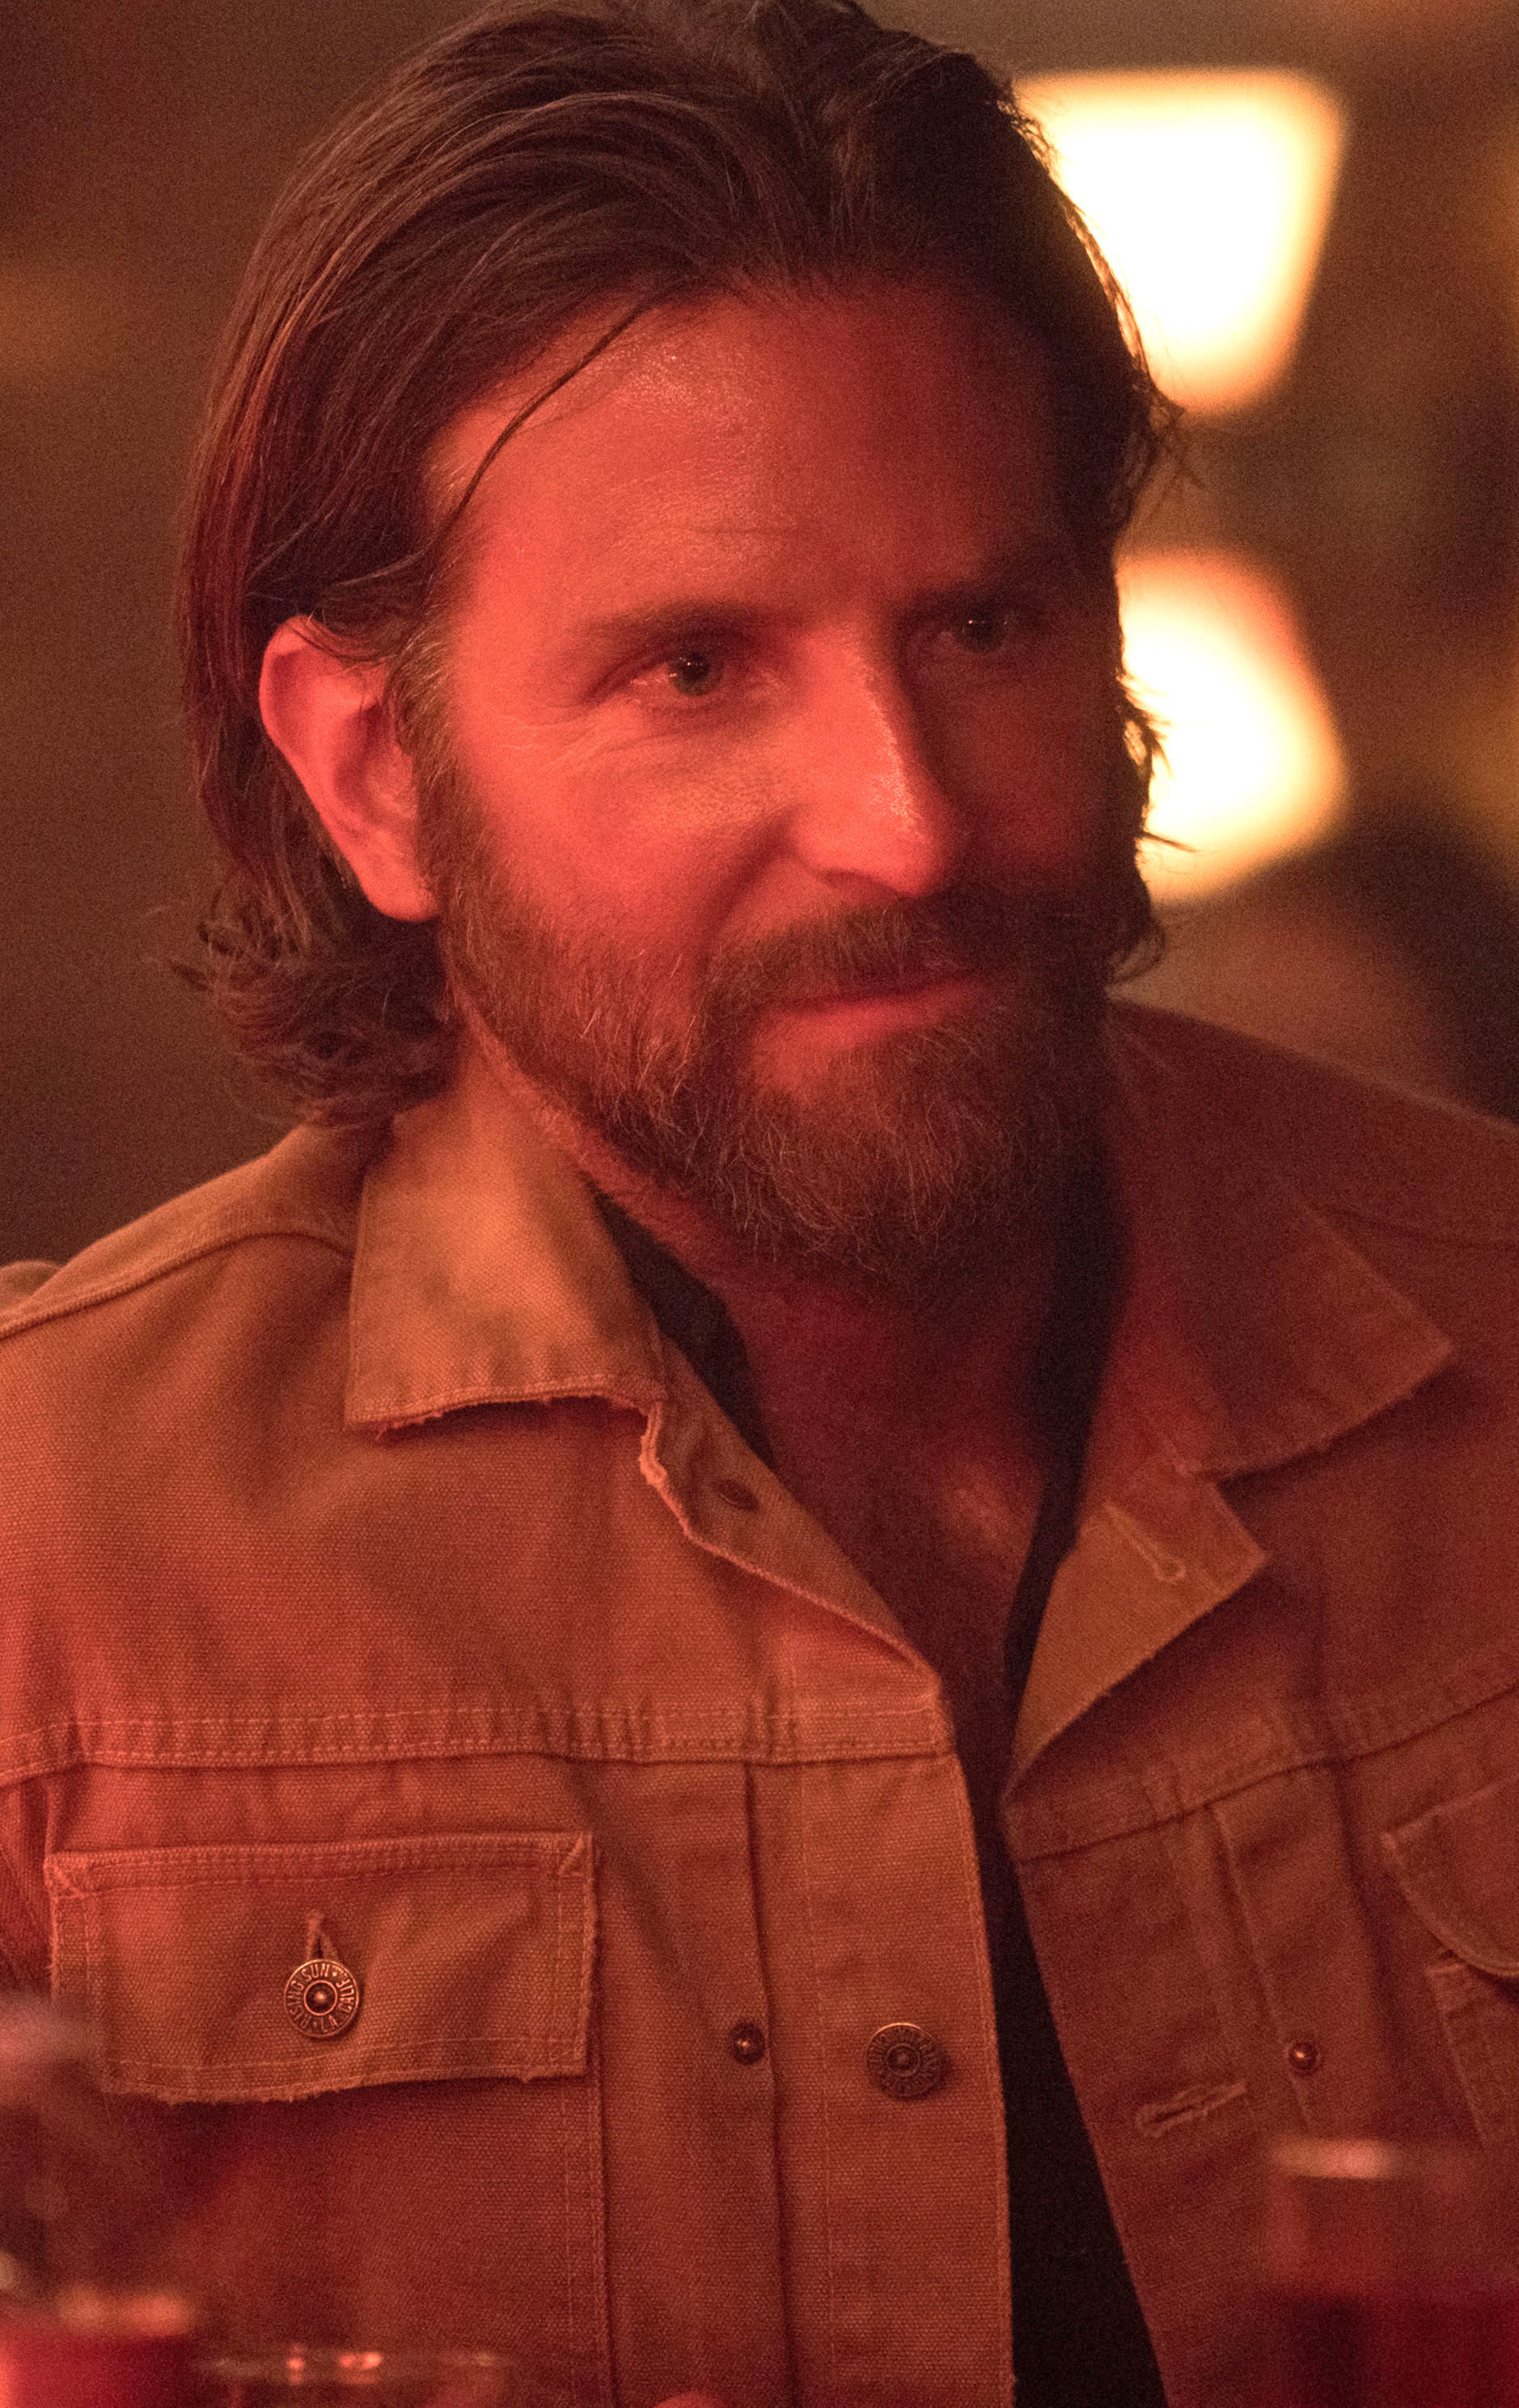 Bradley Cooper with long hair and a beard, wearing a rusty jacket in a bar